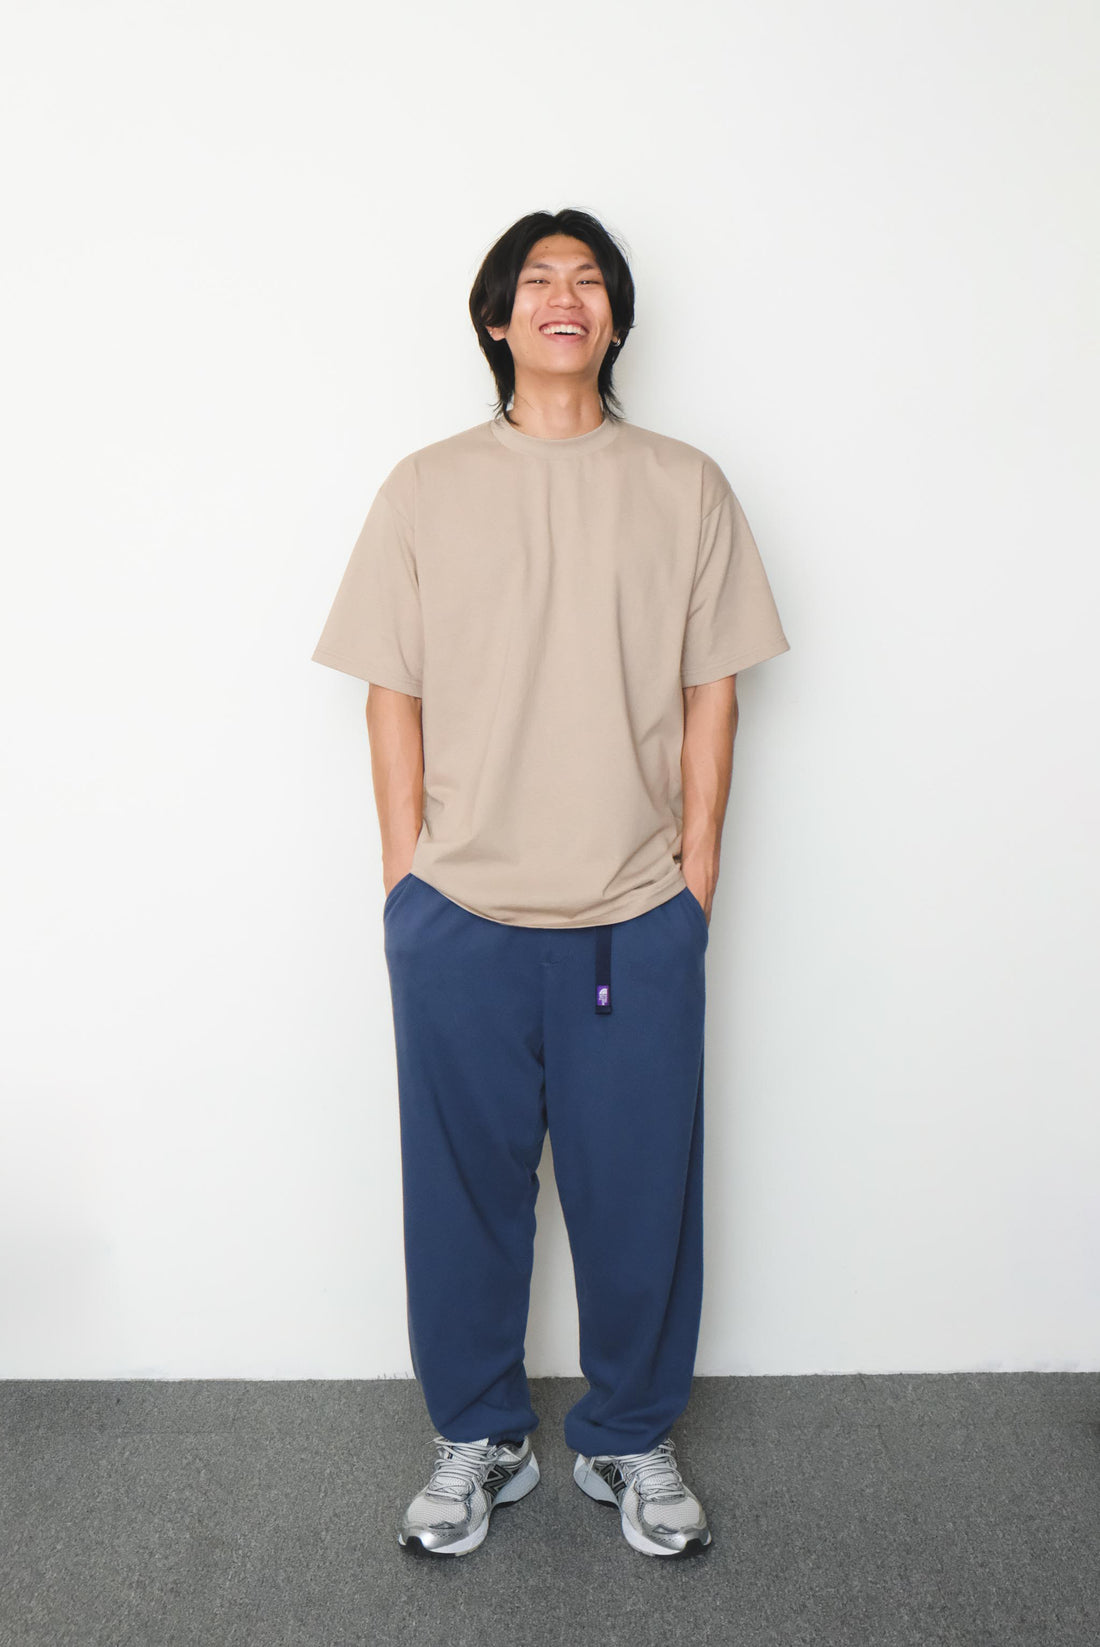 【THE NORTH FACE PURPLE LABEL / FIELD SWEAT PANTS / SIZE 34】